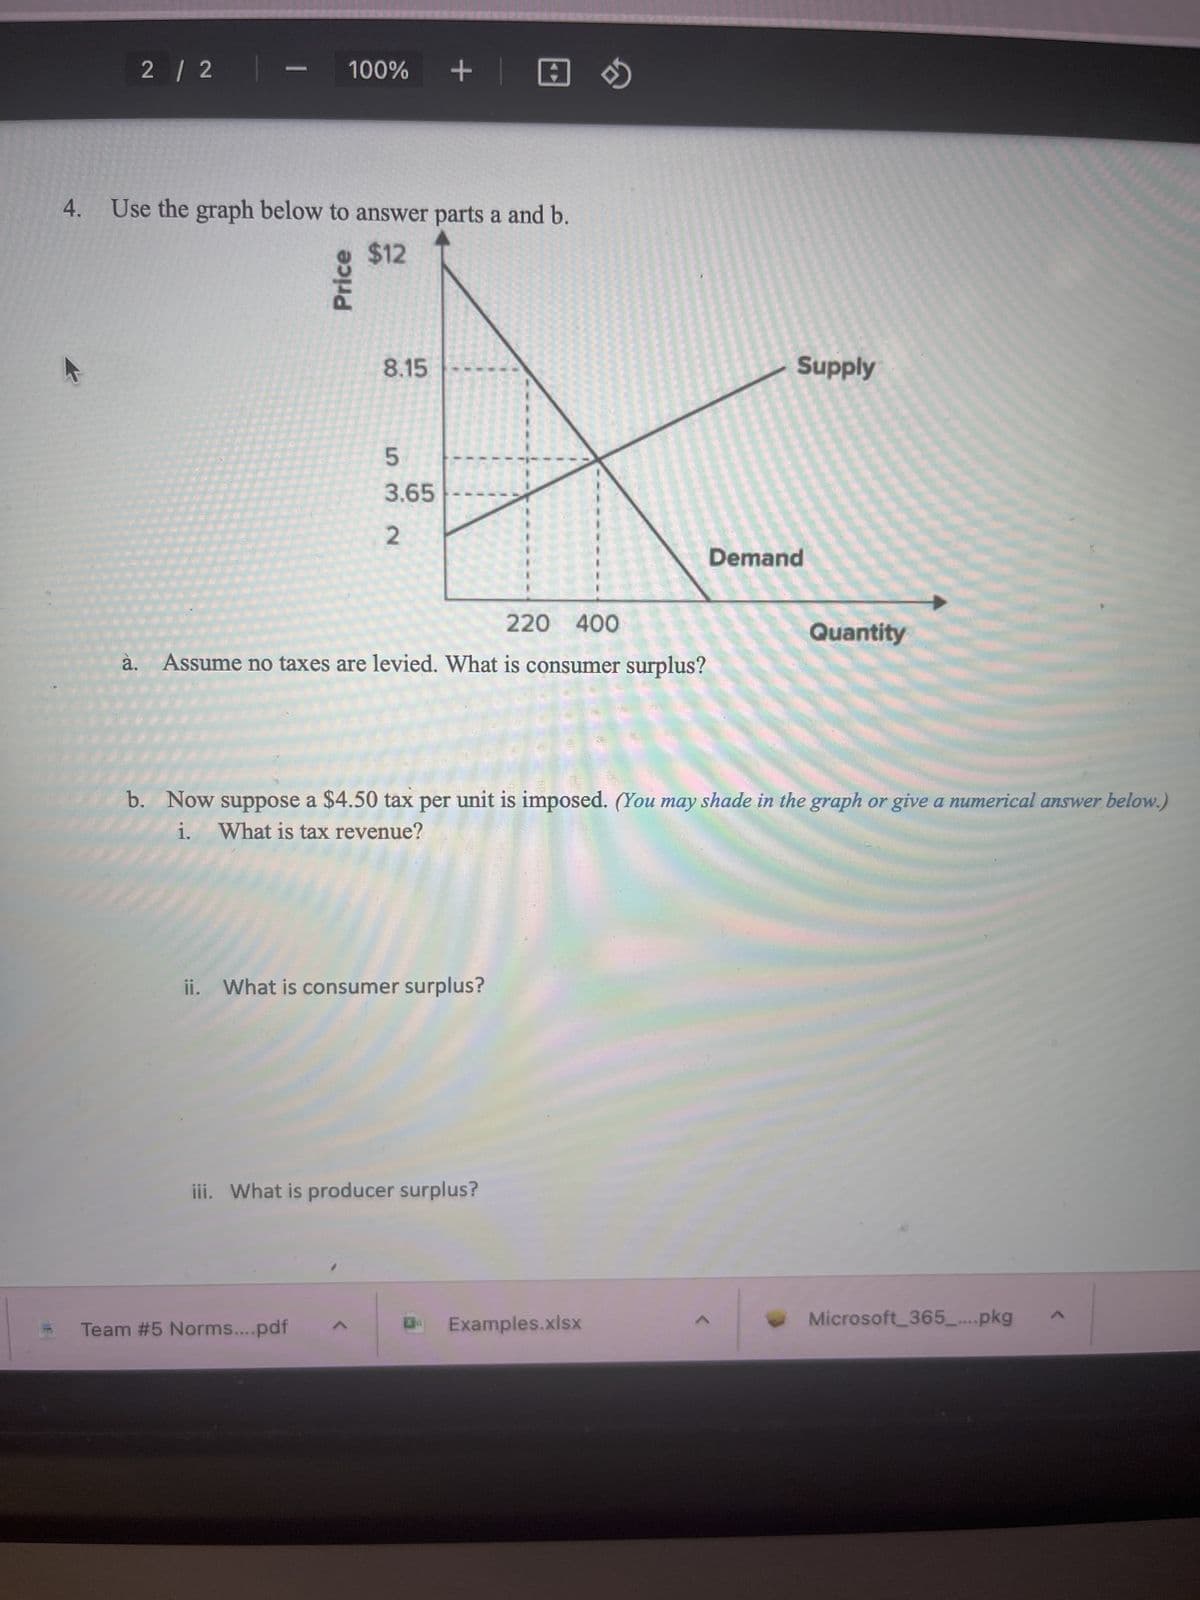 2 / 2 |
—
100% + | 0
4. Use the graph below to answer parts a and b.
$12
Price
8.15
5
3.65
2
220 400
à. Assume no taxes are levied. What is consumer surplus?
Team # 5 Norms....pdf
ii. What is consumer surplus?
iii. What is producer surplus?
b. Now suppose a $4.50 tax per unit is imposed. (You may shade in the graph or give a numerical answer below.)
What is tax revenue?
i.
Supply
Examples.xlsx
Demand
Quantity
Microsoft 365_....pkg